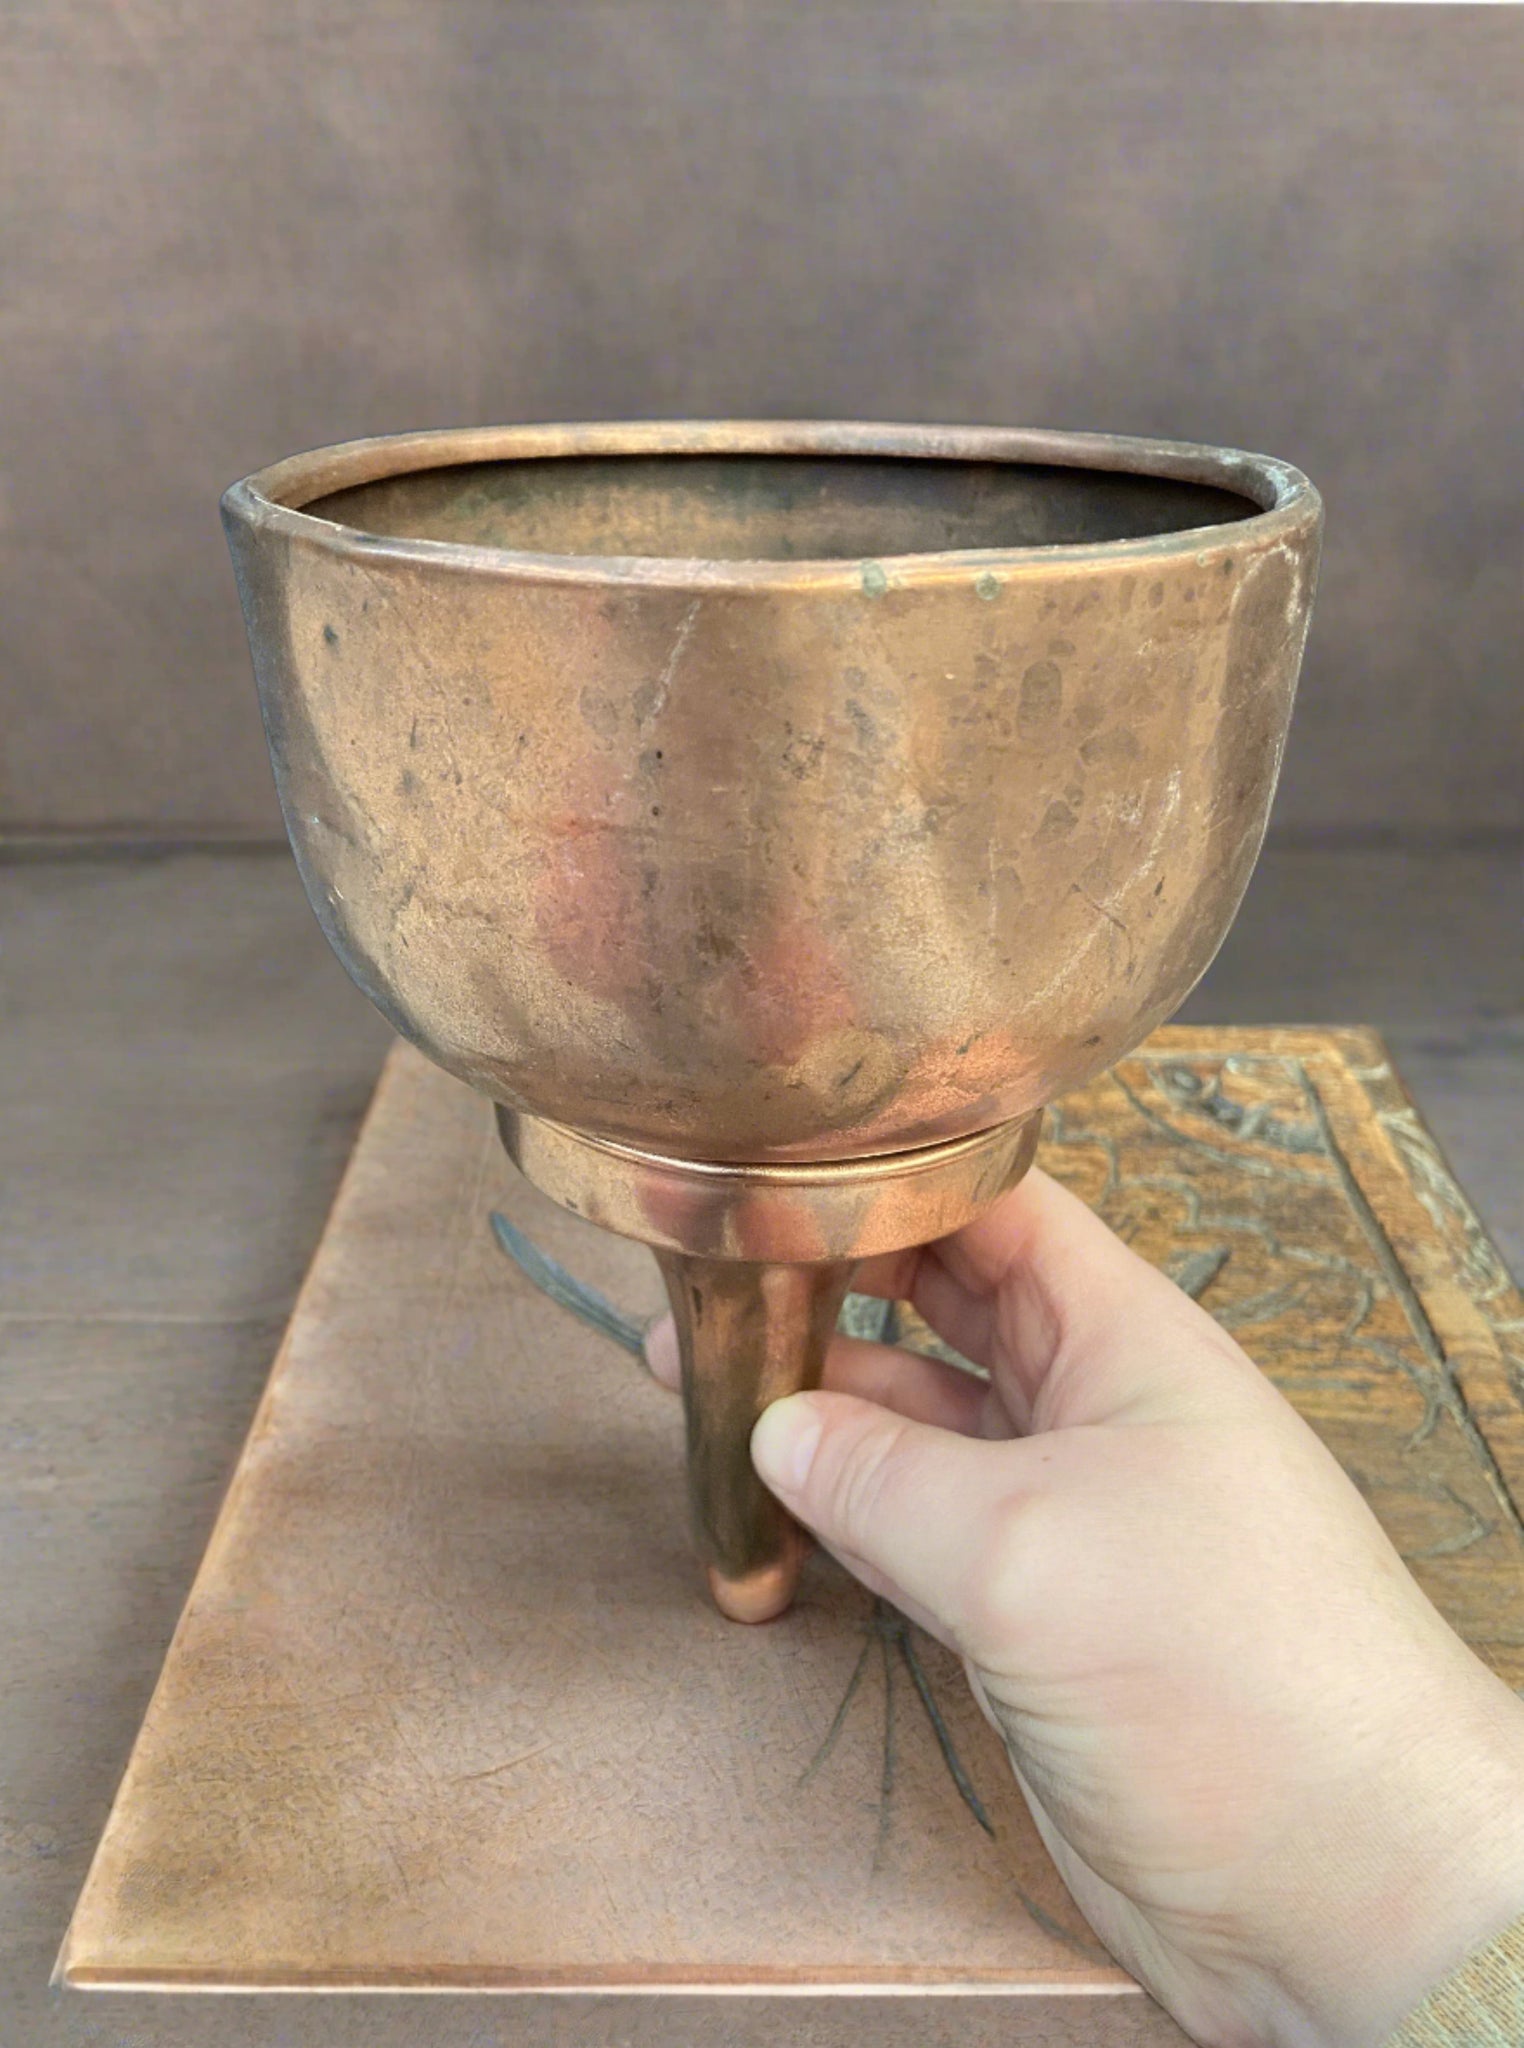 Antique copper funnel with a thick spout. It could have been used in the kitchen or brewery or for funnelling fuel or oil into a vehicle.